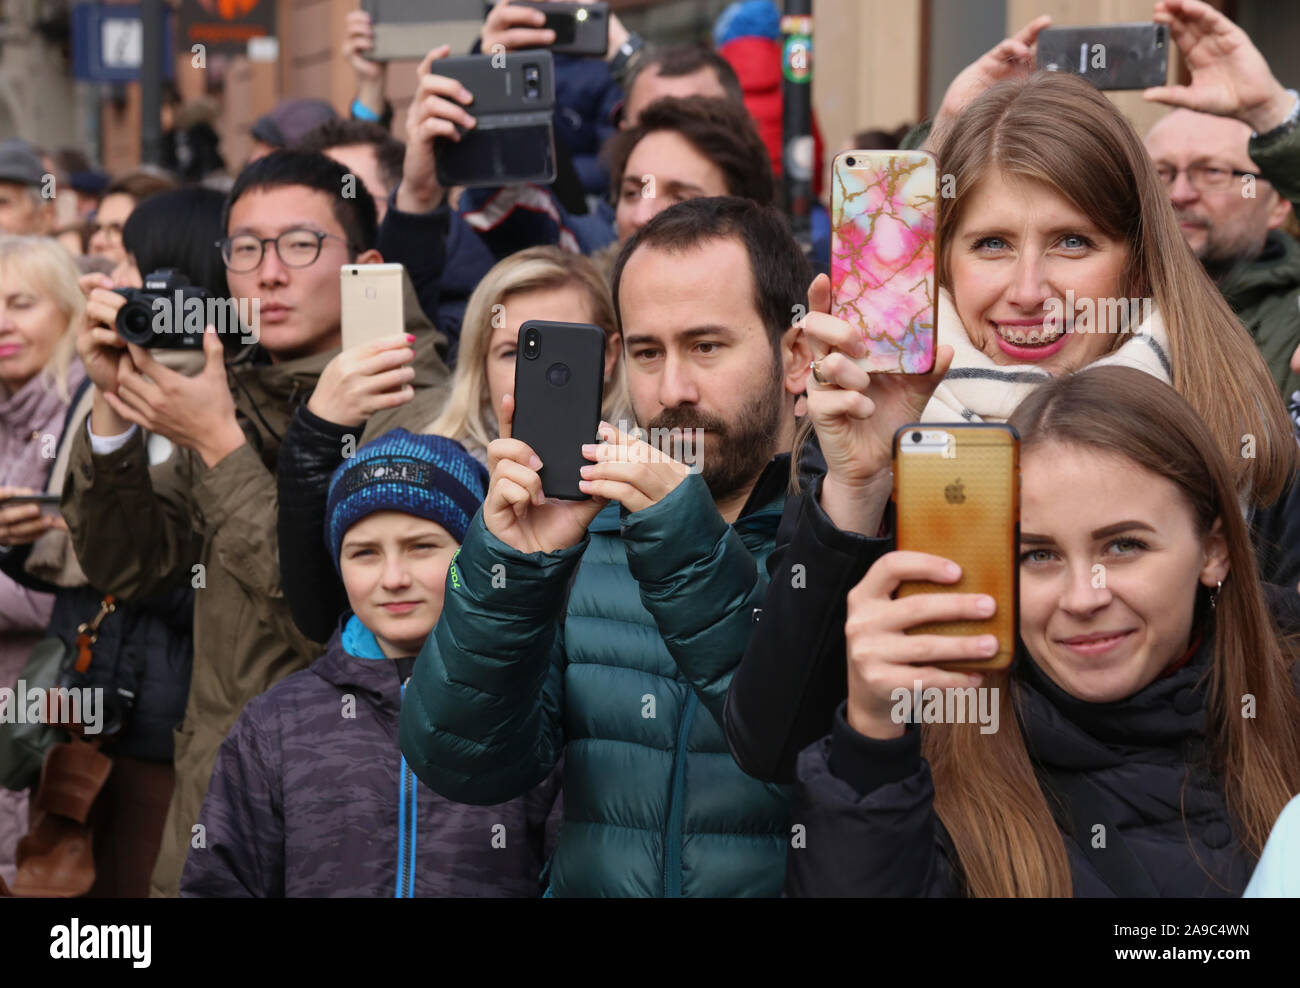 Cracow Krakow Poland People Taking Pictures With Cellphones Stock Photo Alamy